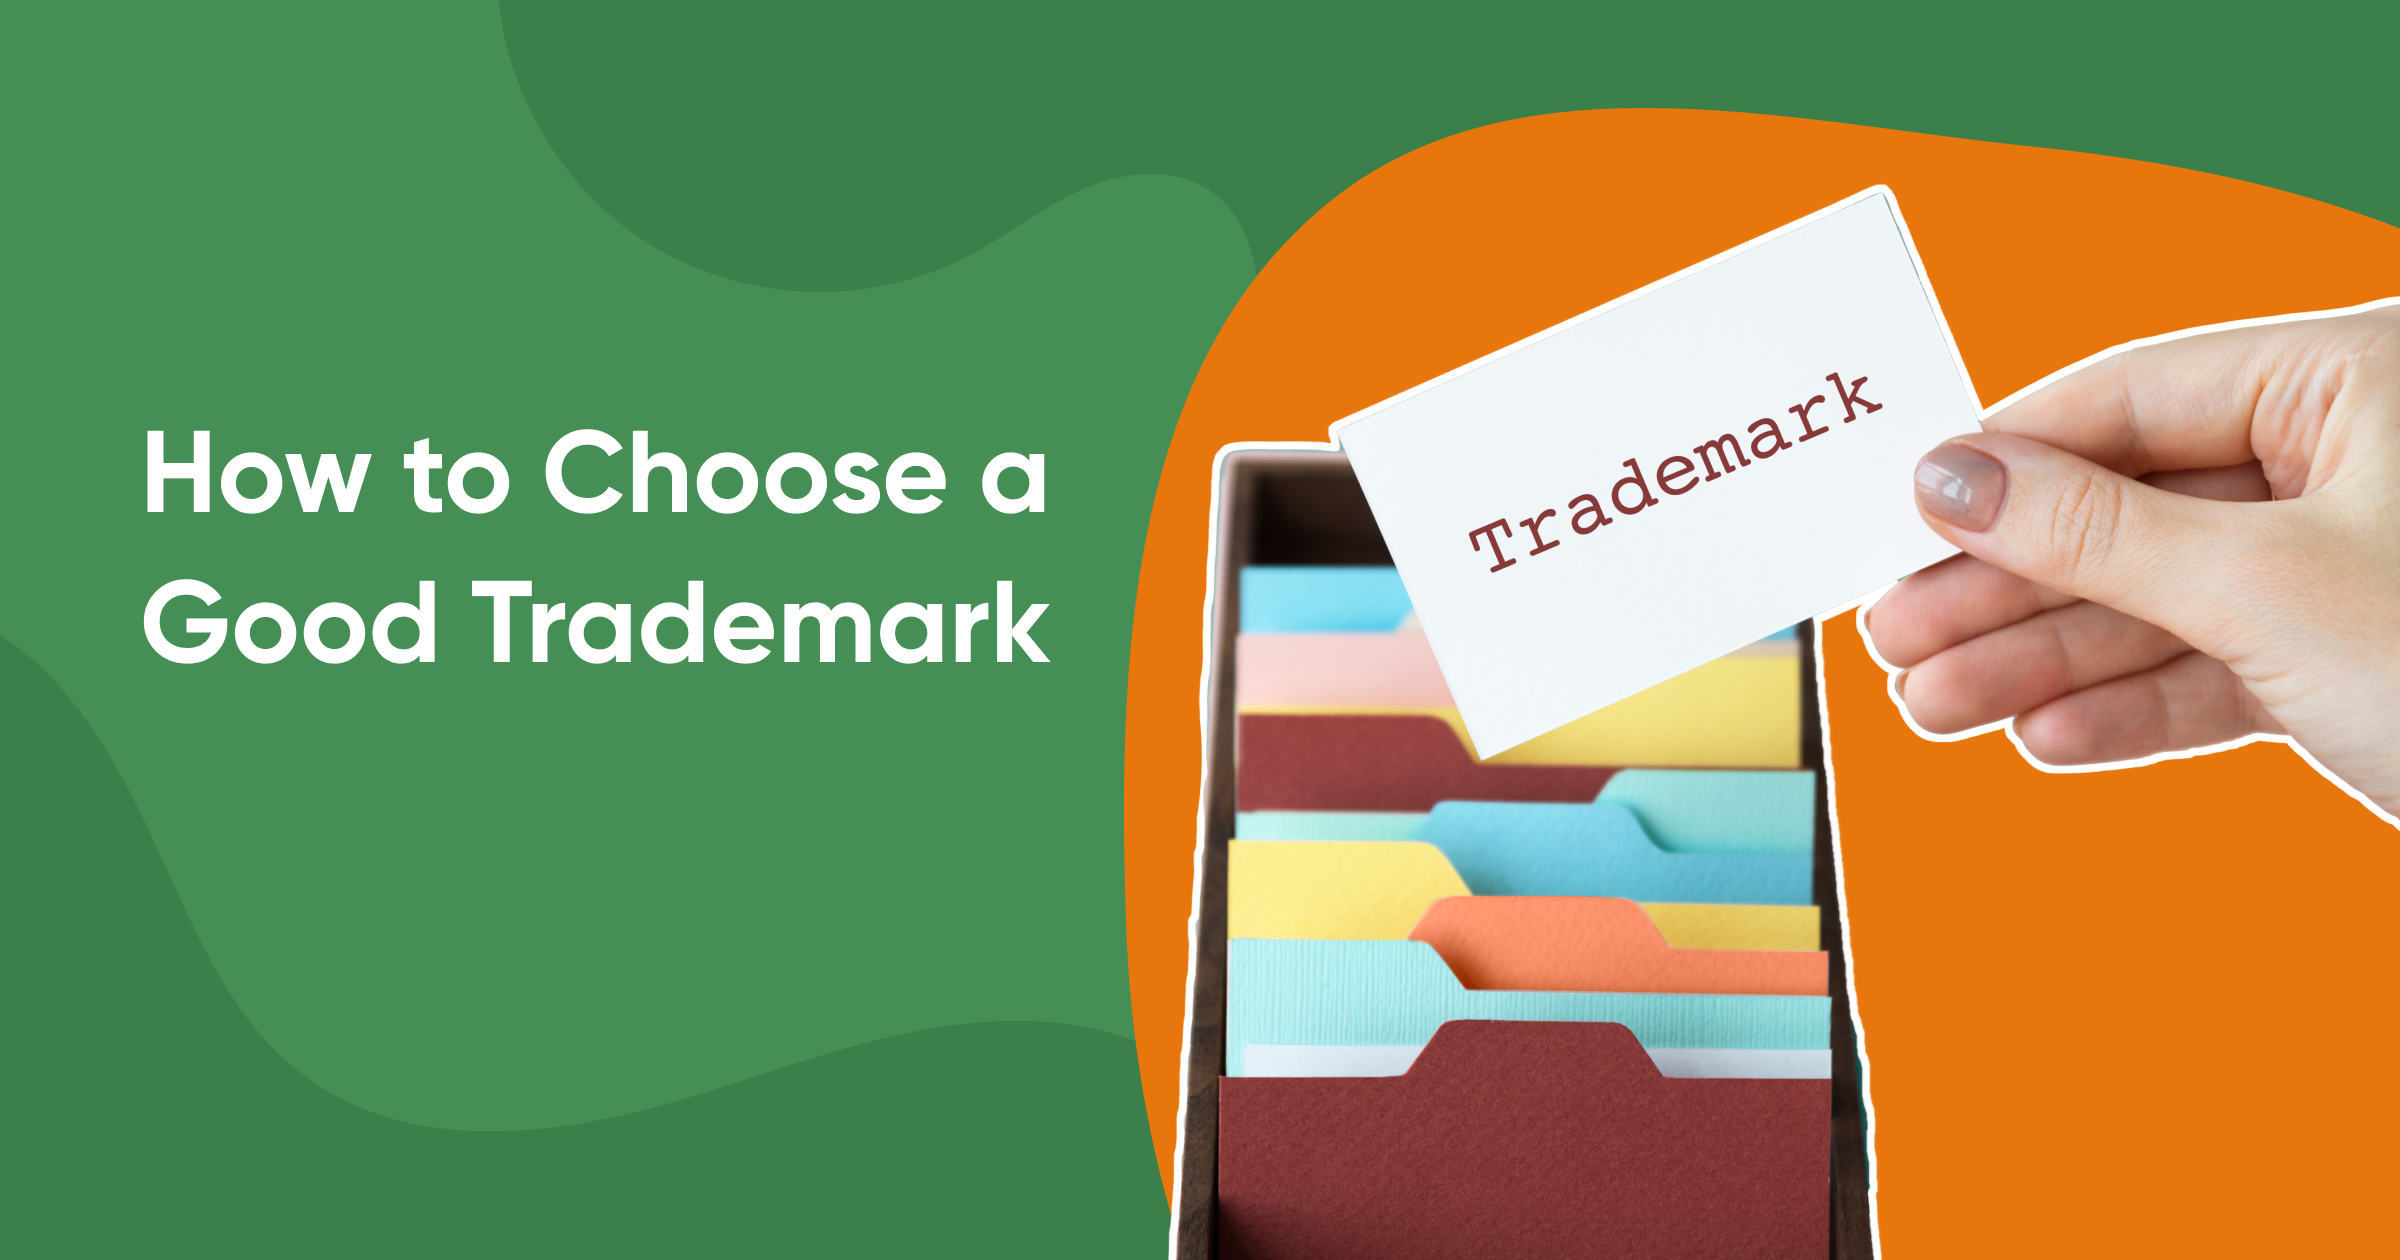 How to Choose a Good Trademark